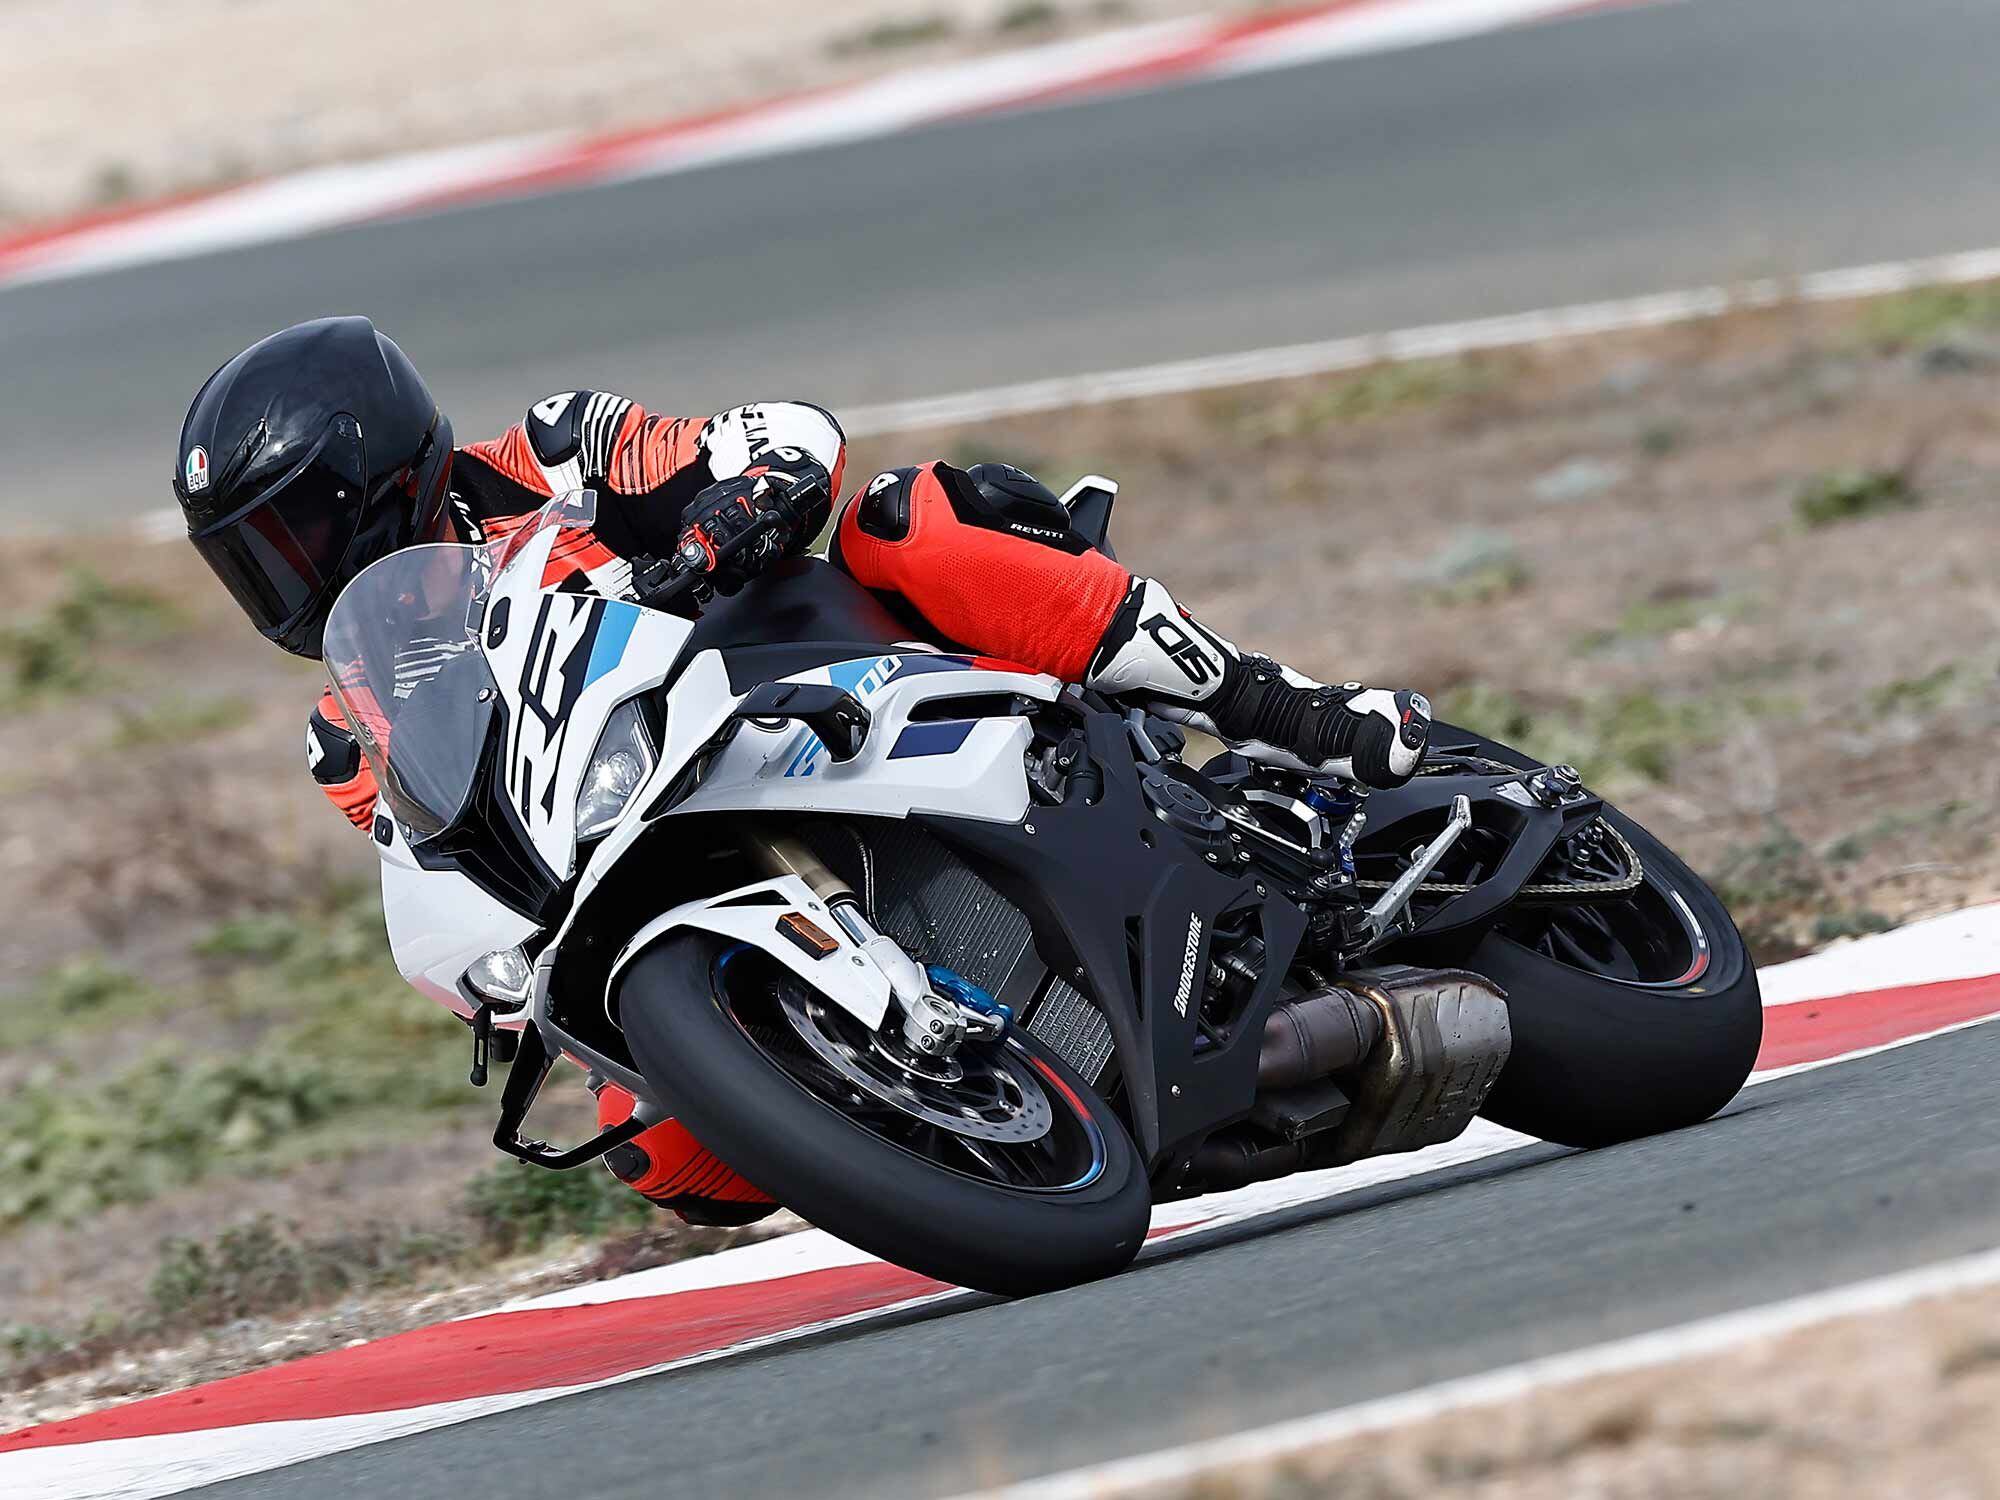 The Almeria Circuit in southeastern Spain has just about every type of corner and is an ideal place to test an open-class sportbike.